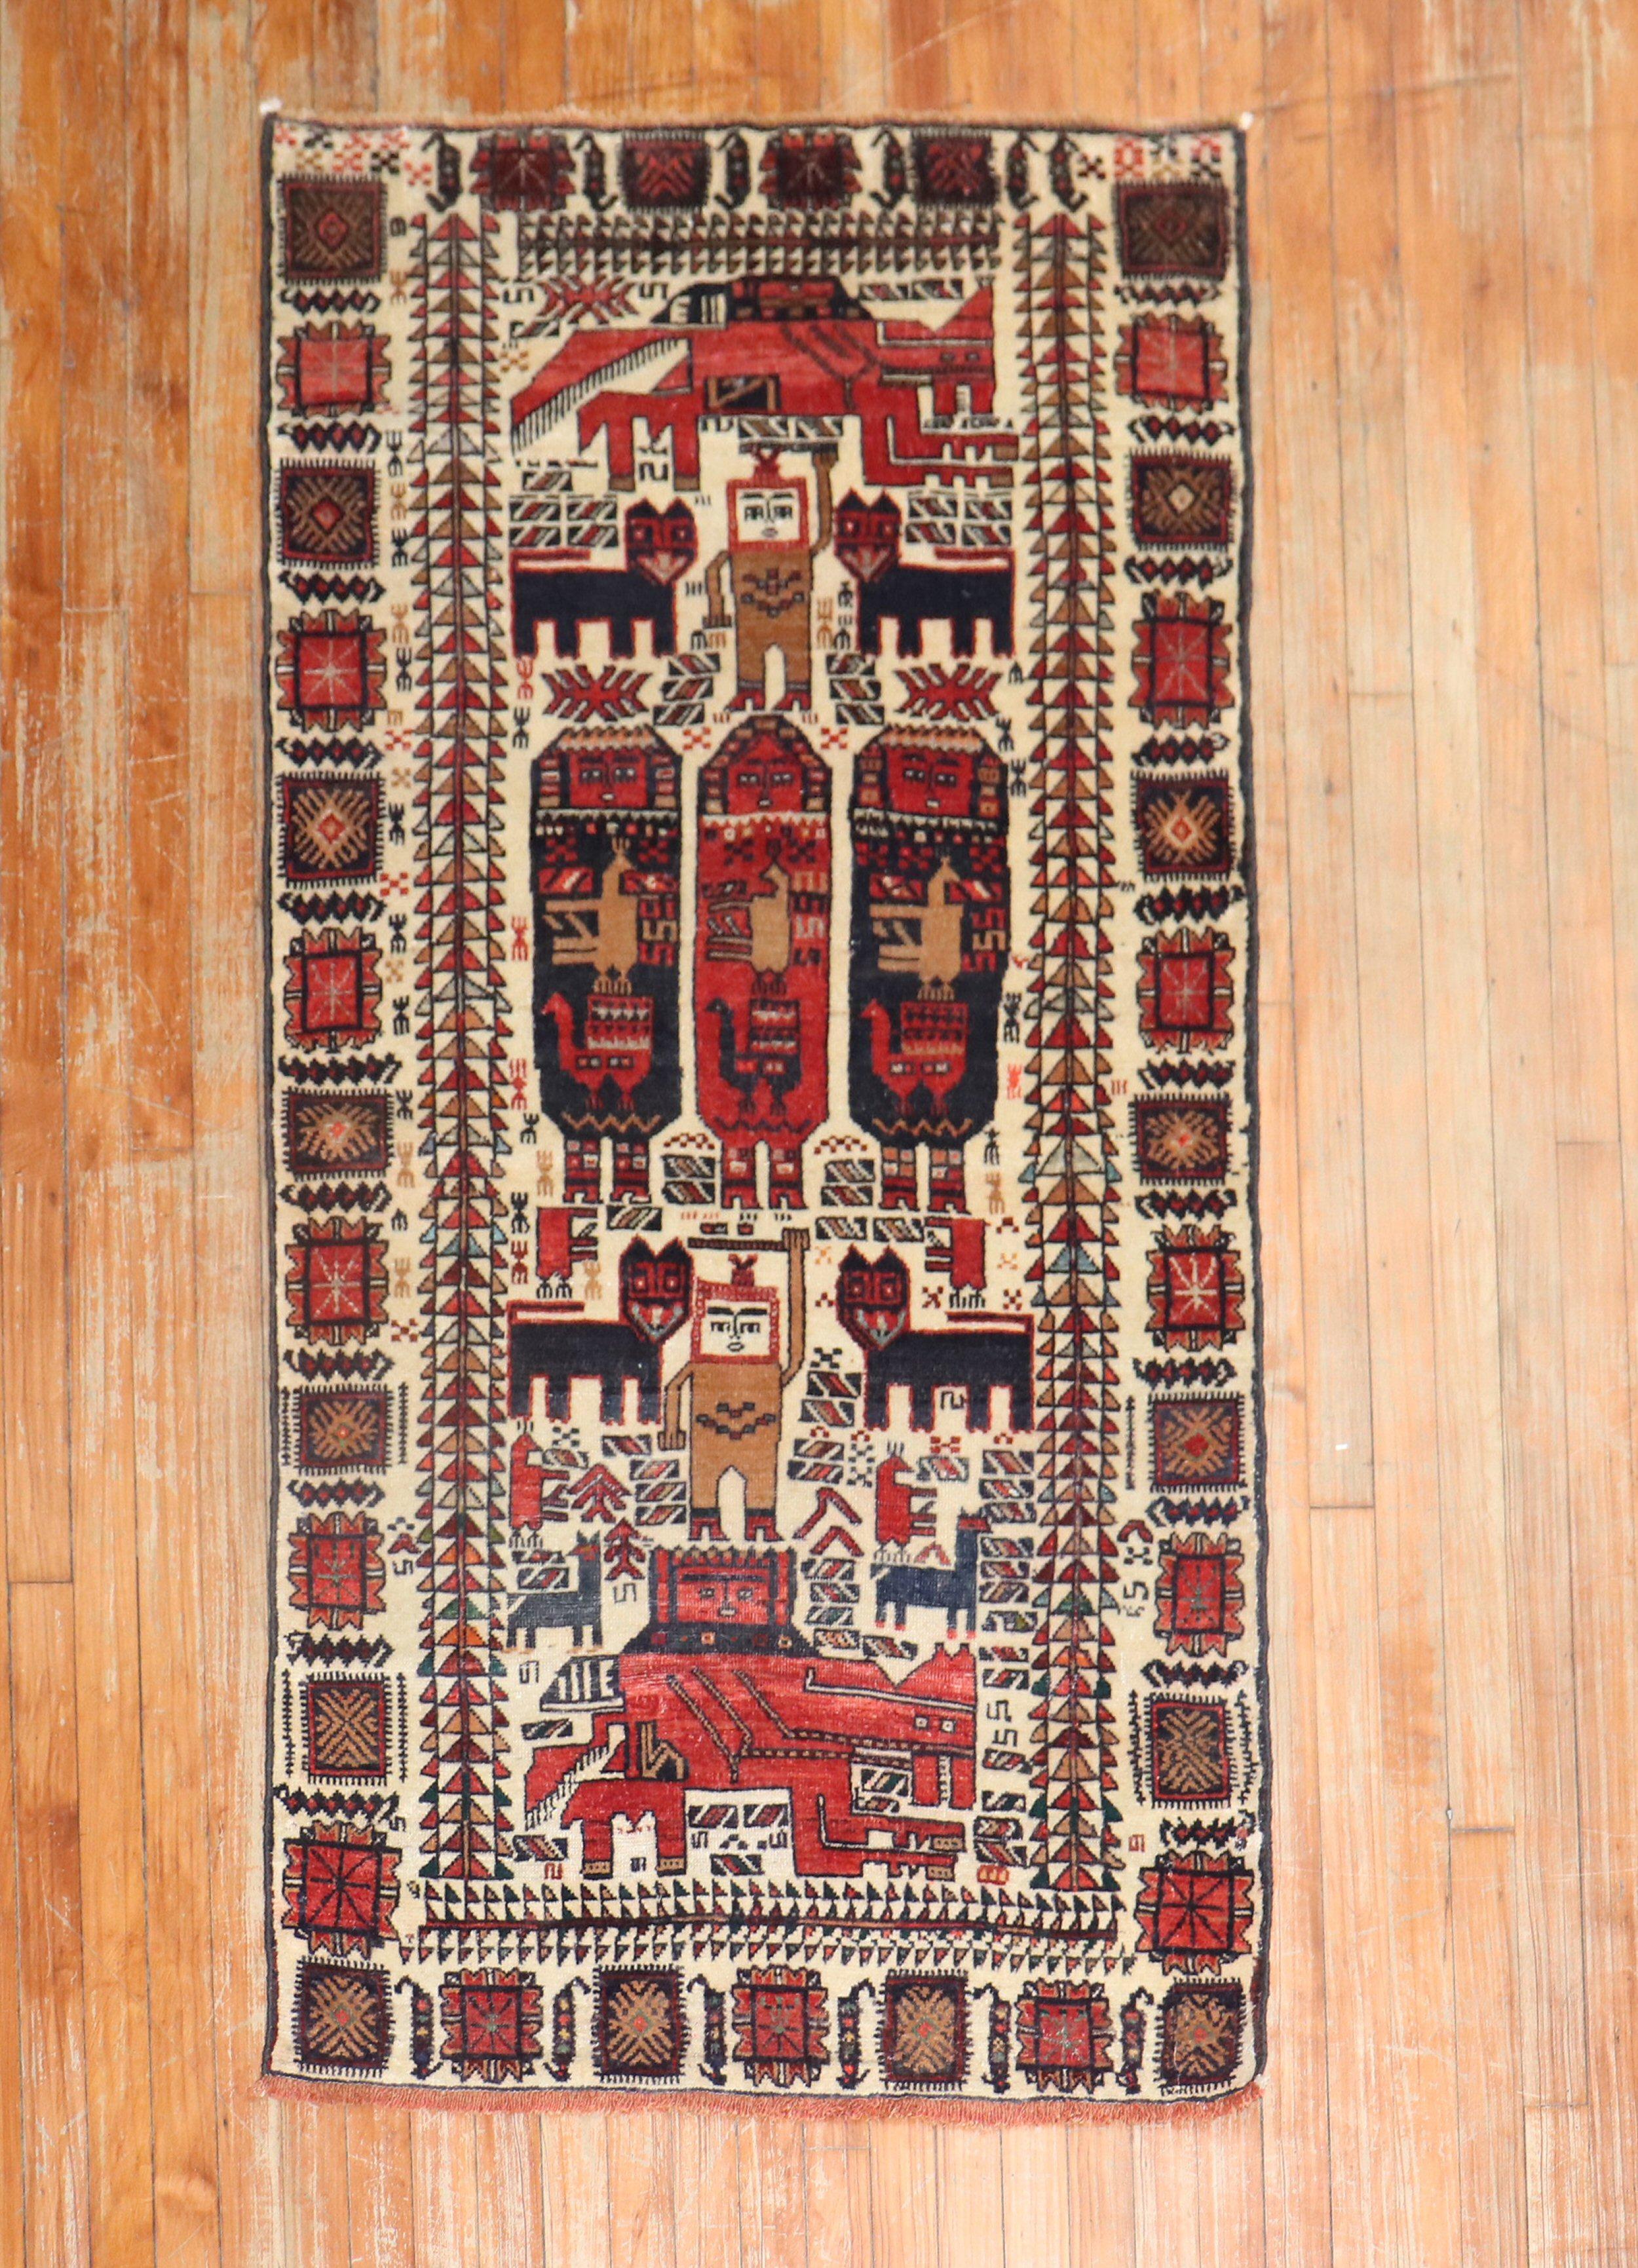 A mid 20th Century Persian Balouch rug depicting a pictorial design.

Measures: 2'11'' x 5'10''.